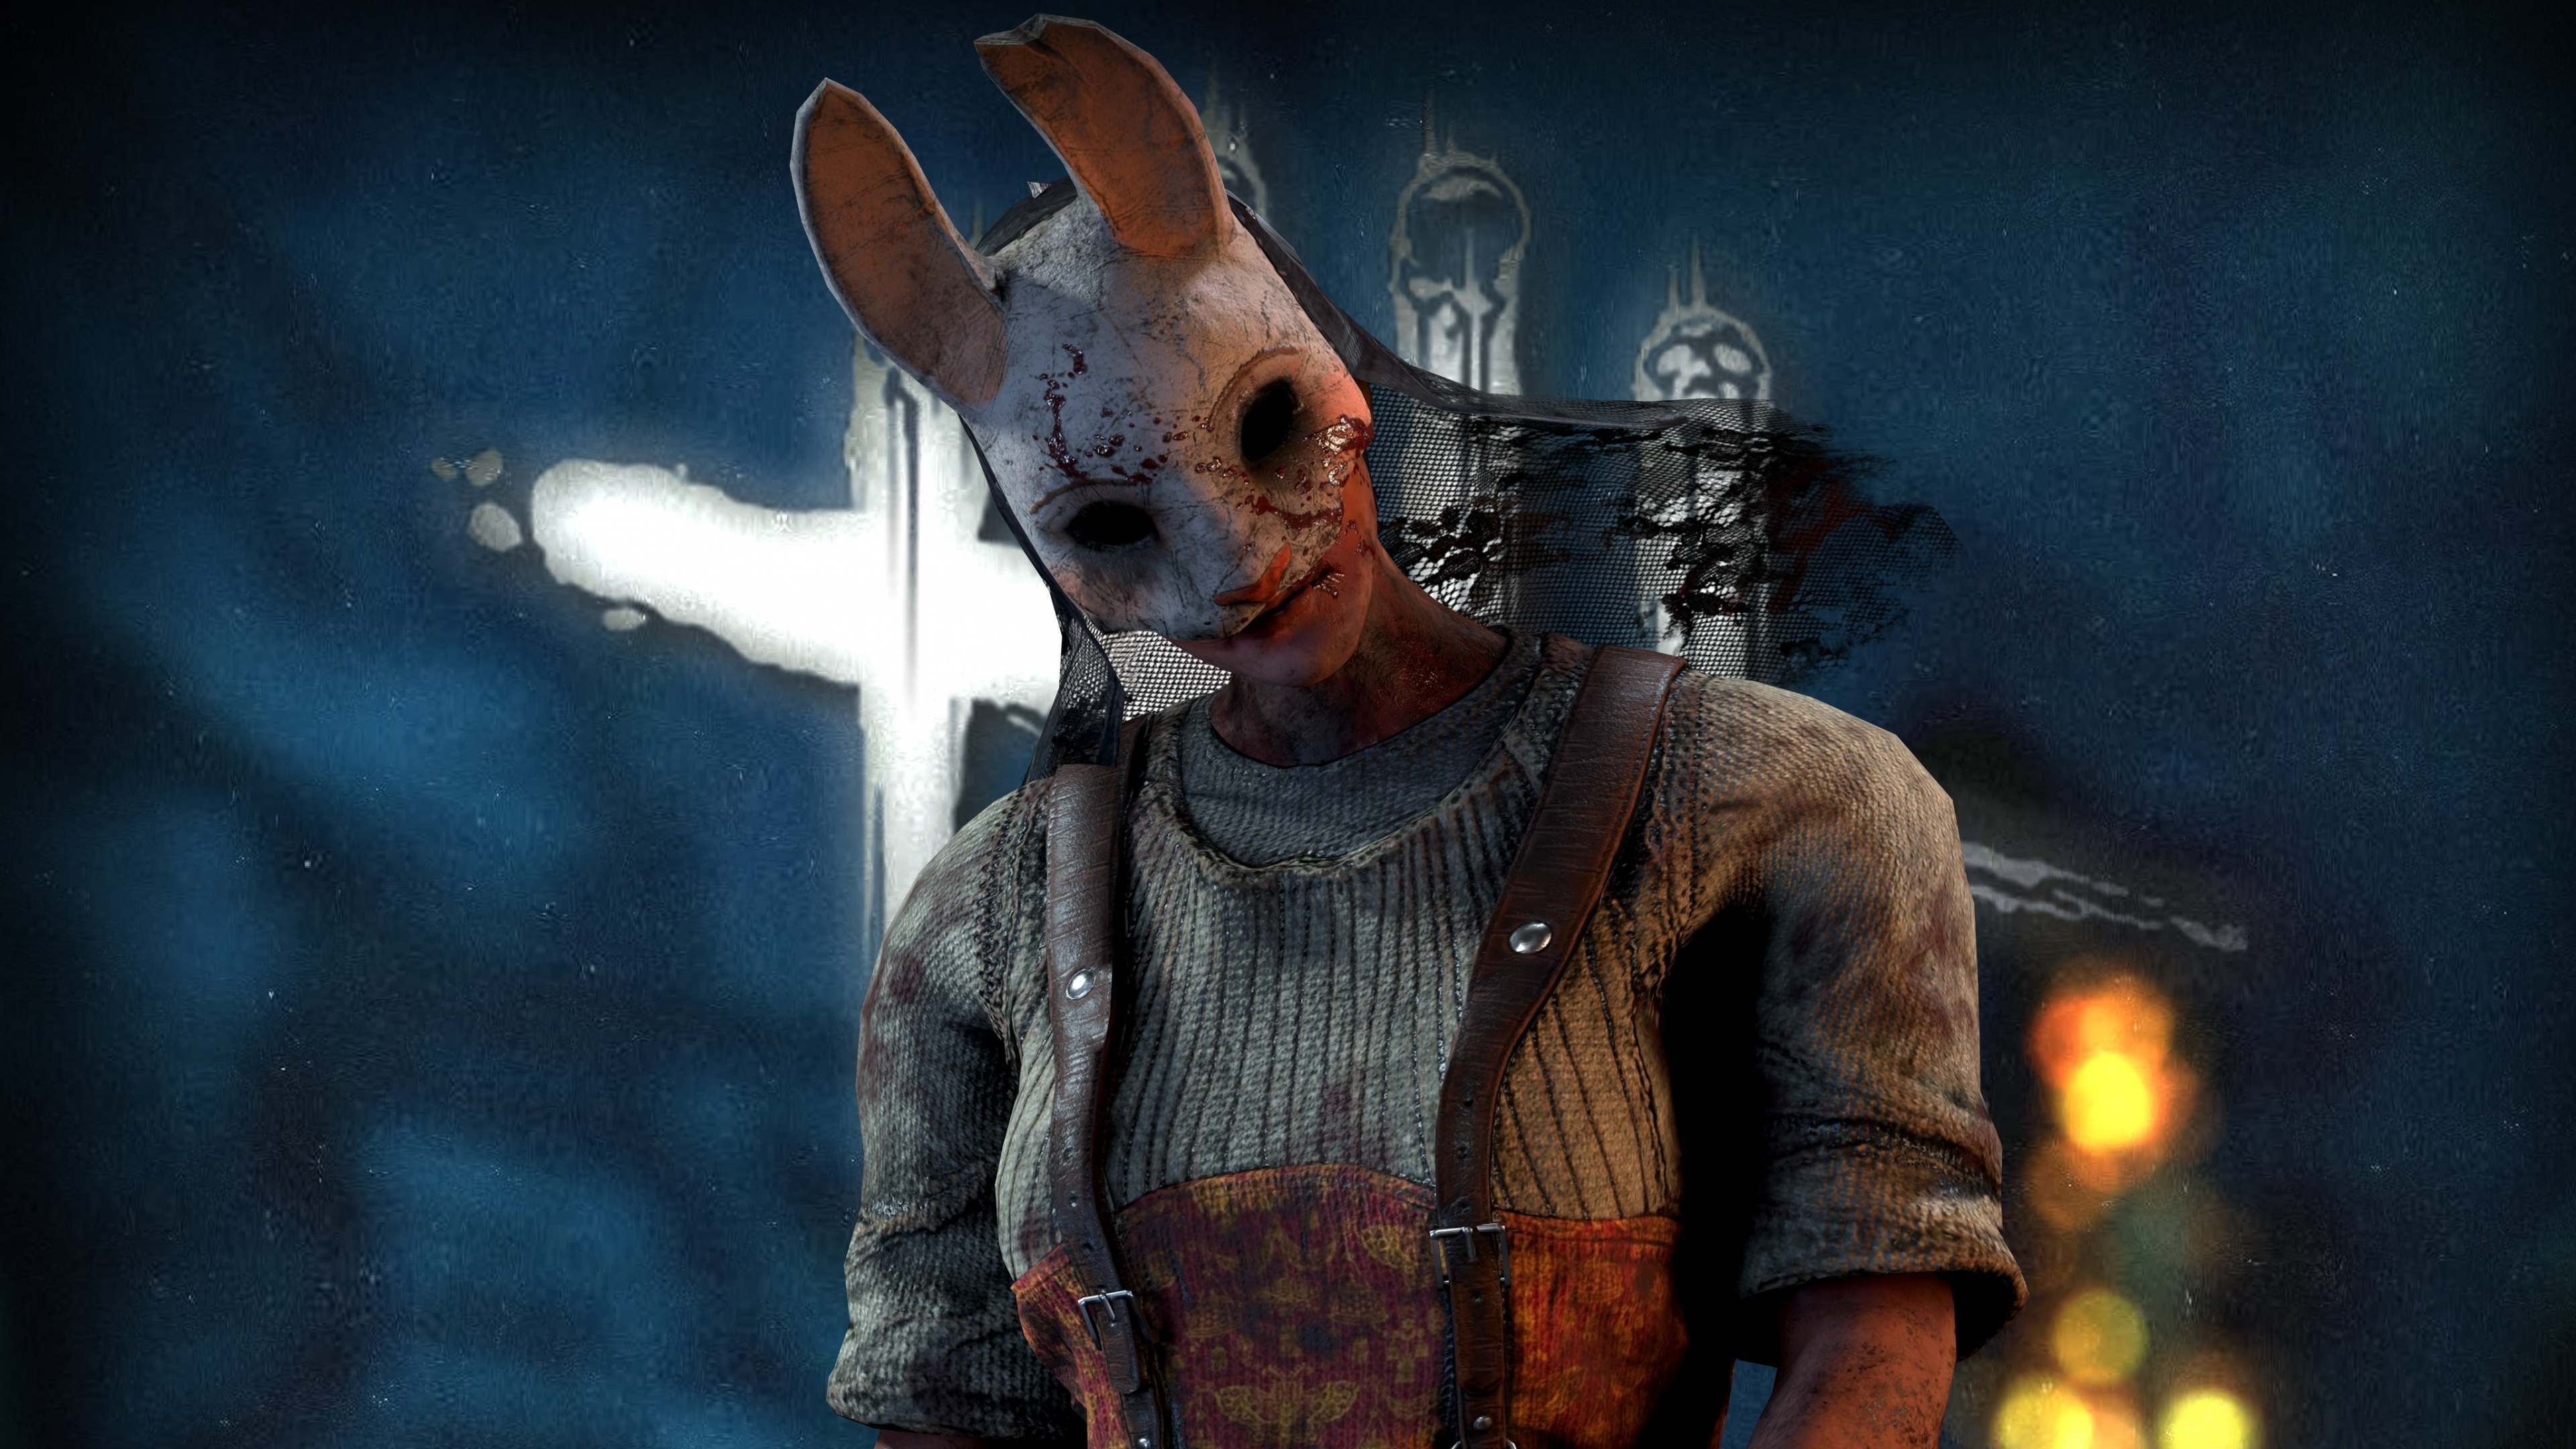 Download 3840x2160 wallpaper huntress, dead by daylight, video game, 2019, 4k, uhd 16:9 ...